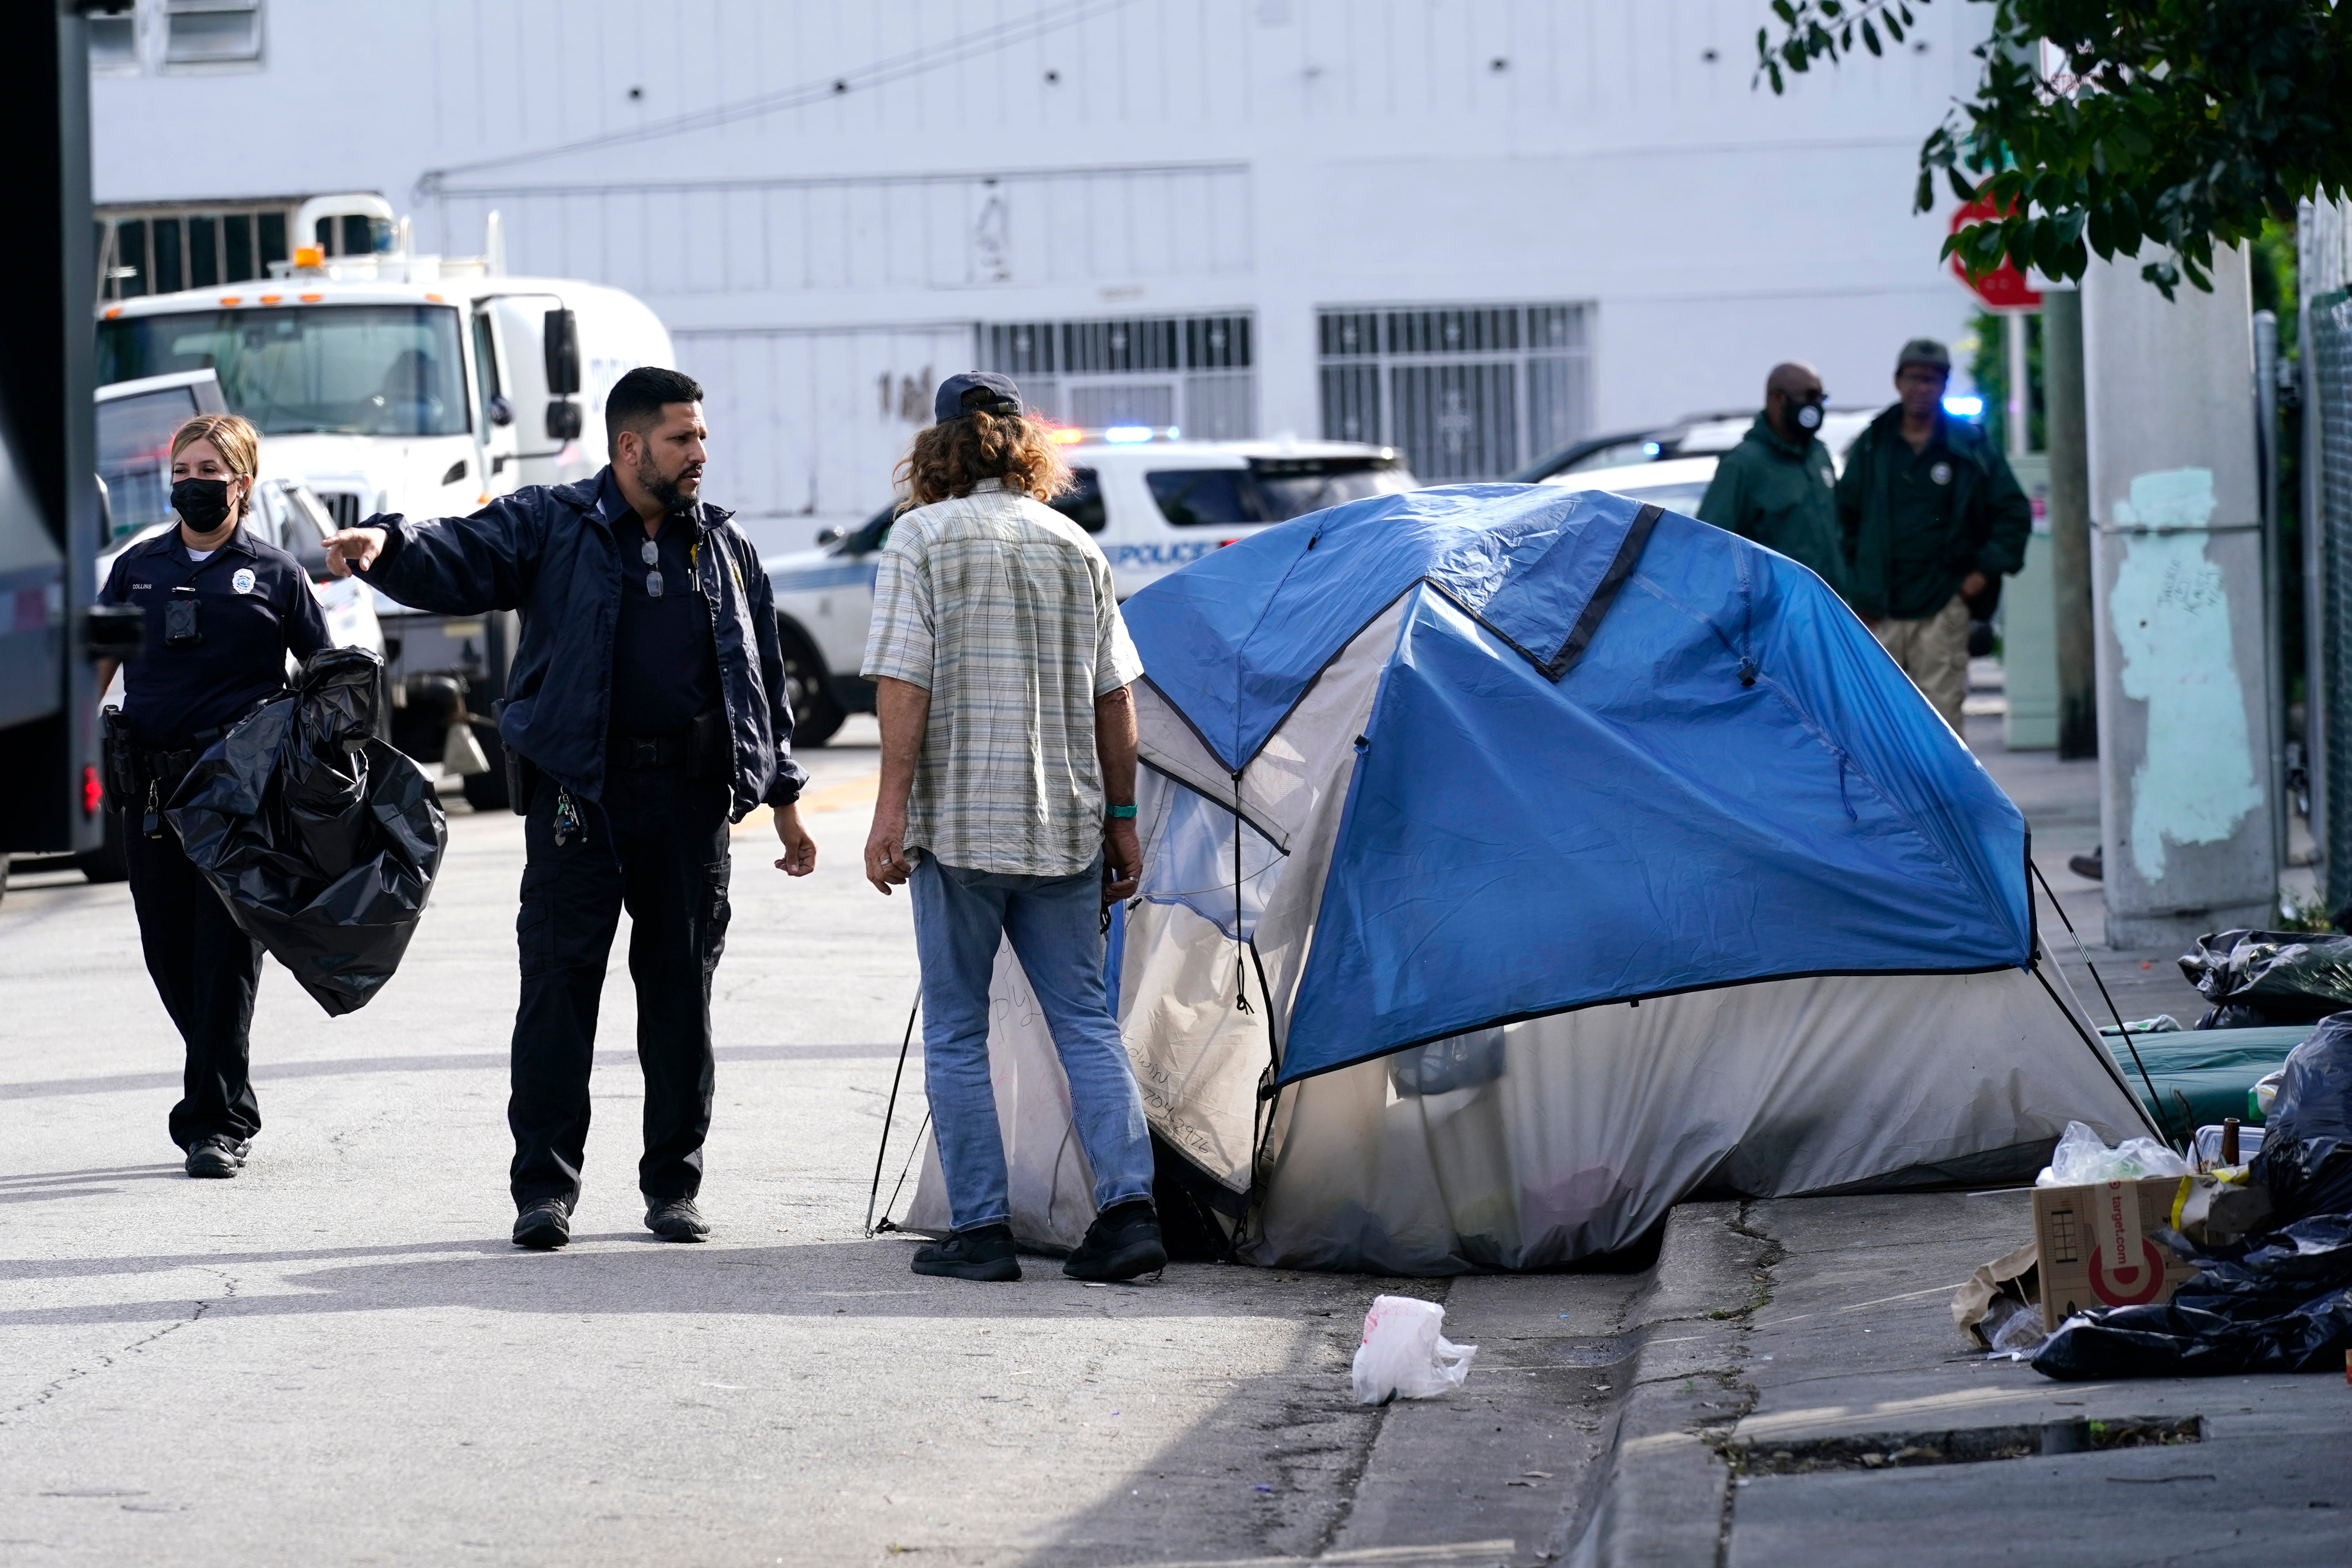 Miami police speak with an unhoused person before a street is cleared in 2021. Under a new Florida law, effective this October, unhoused people cannot sleep in public spaces.